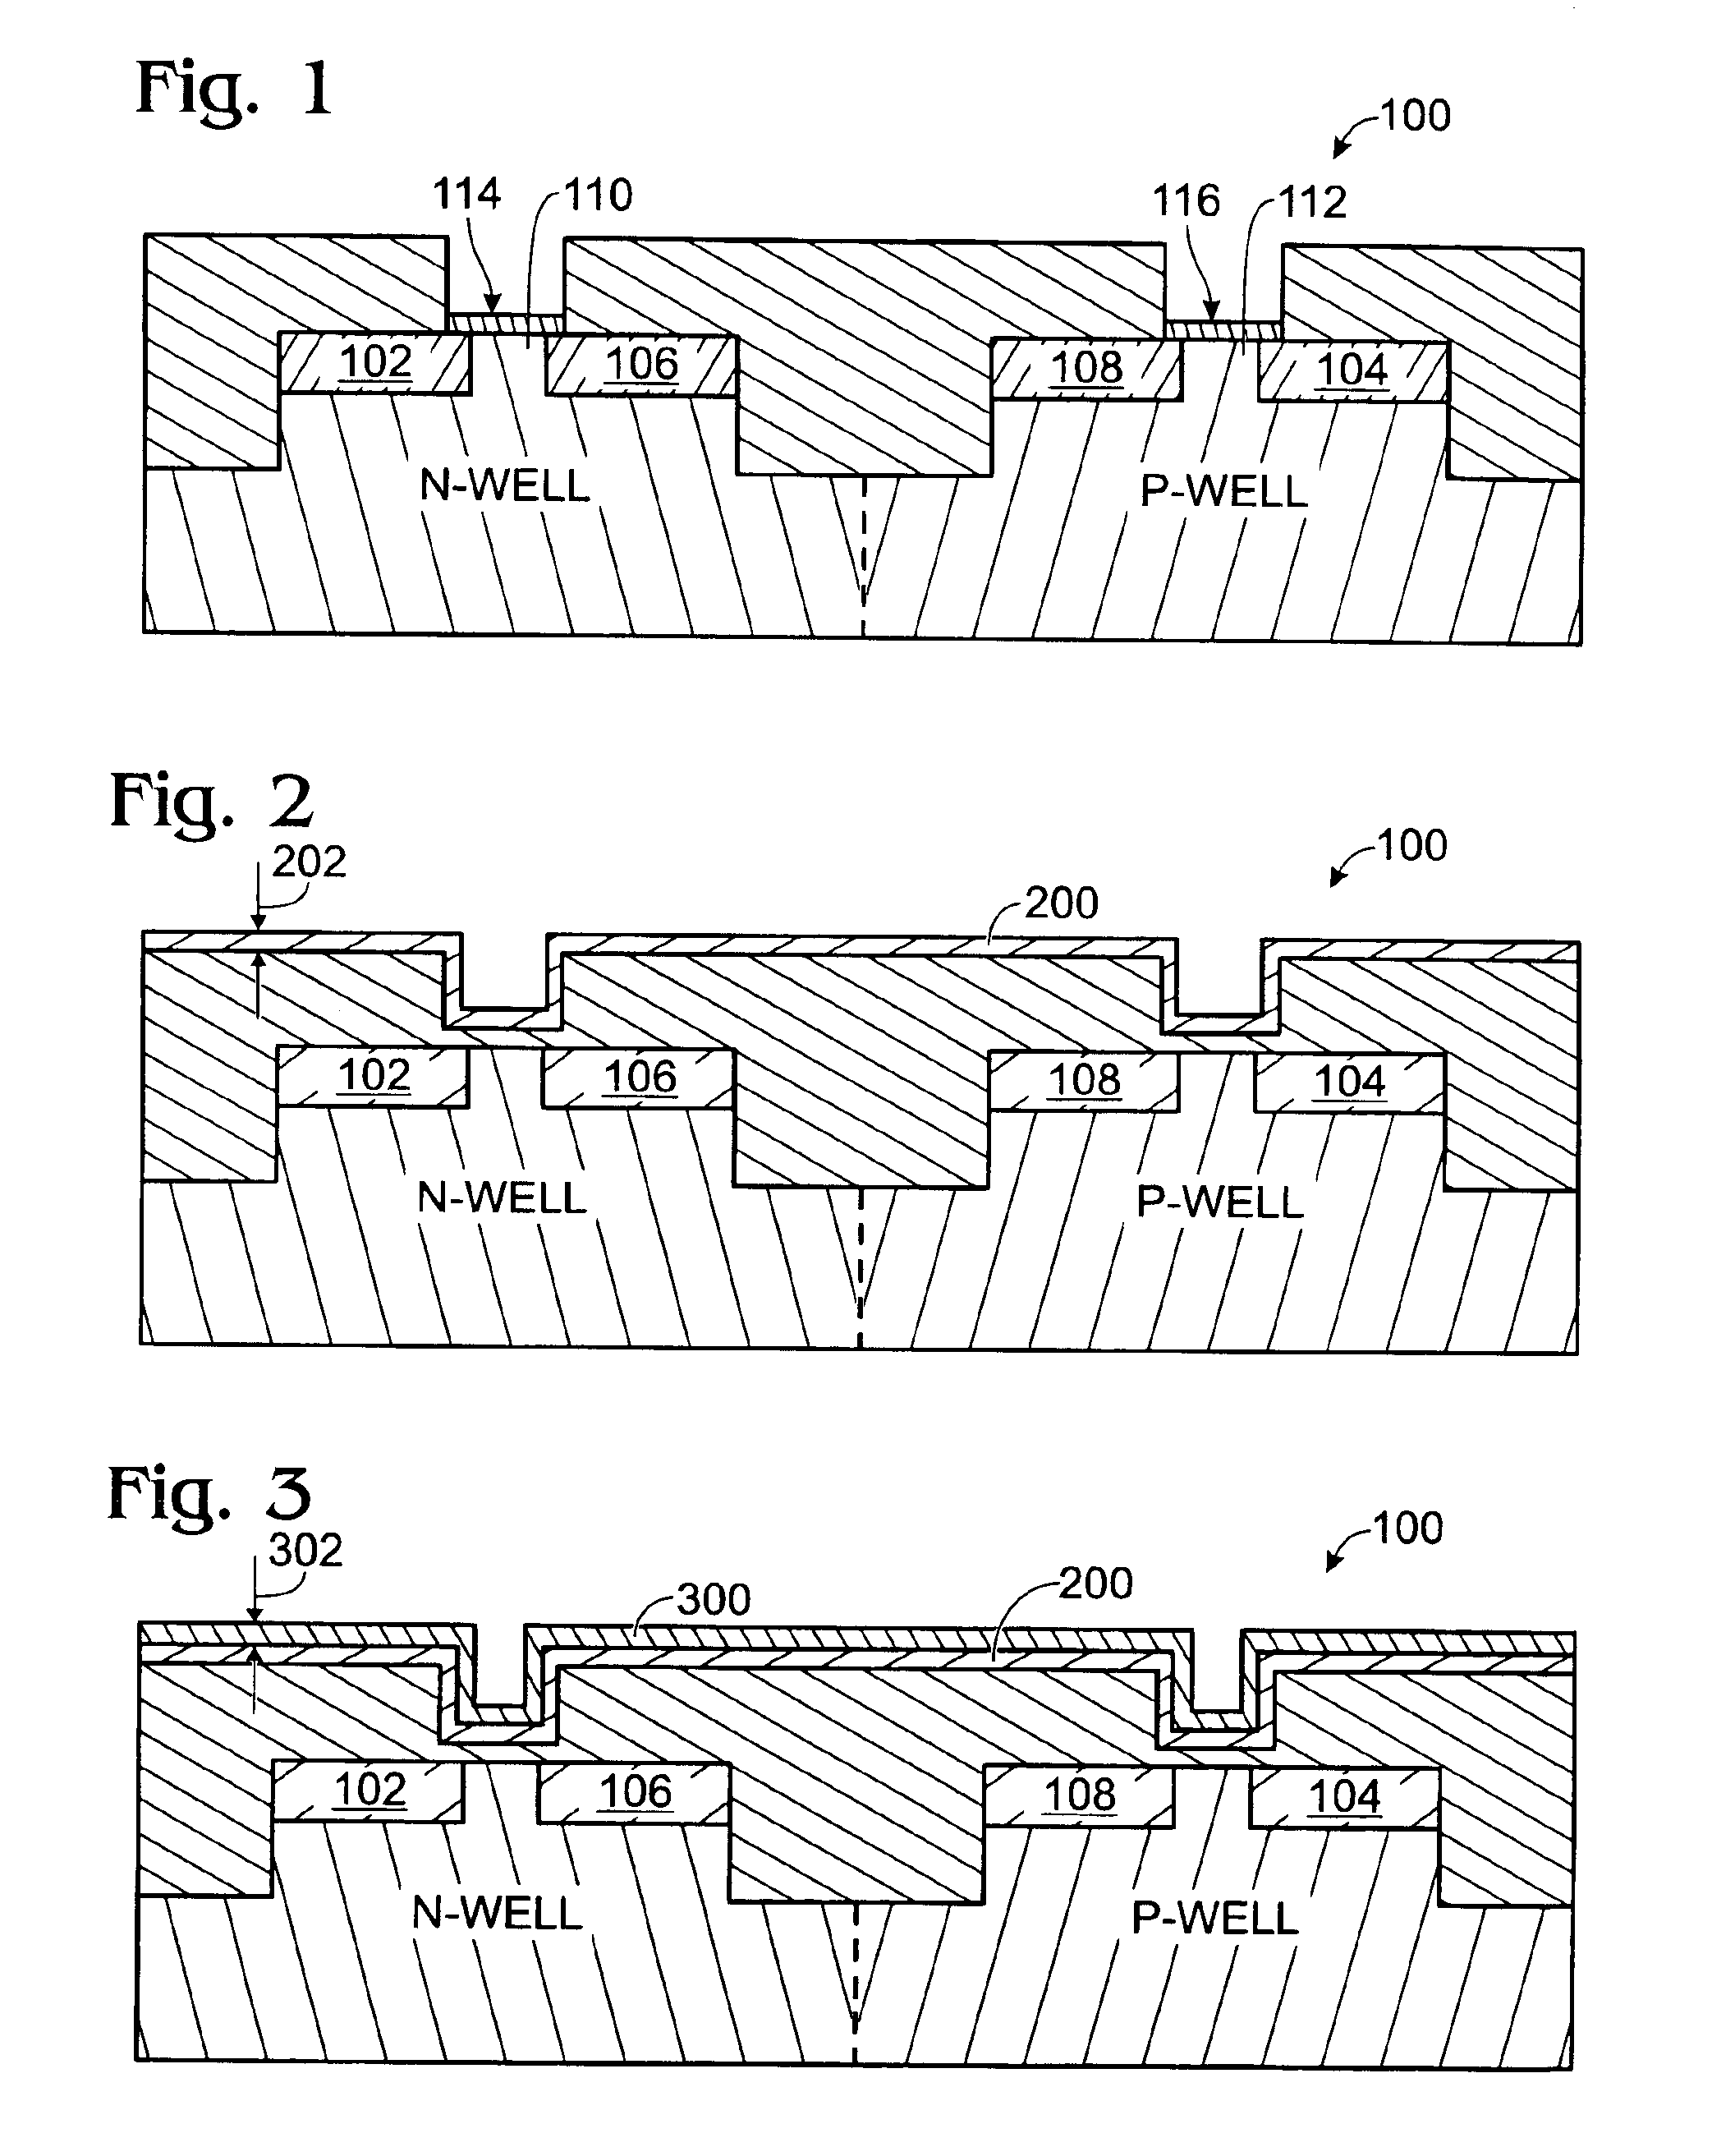 System and method for integrating multiple metal gates for CMOS applications